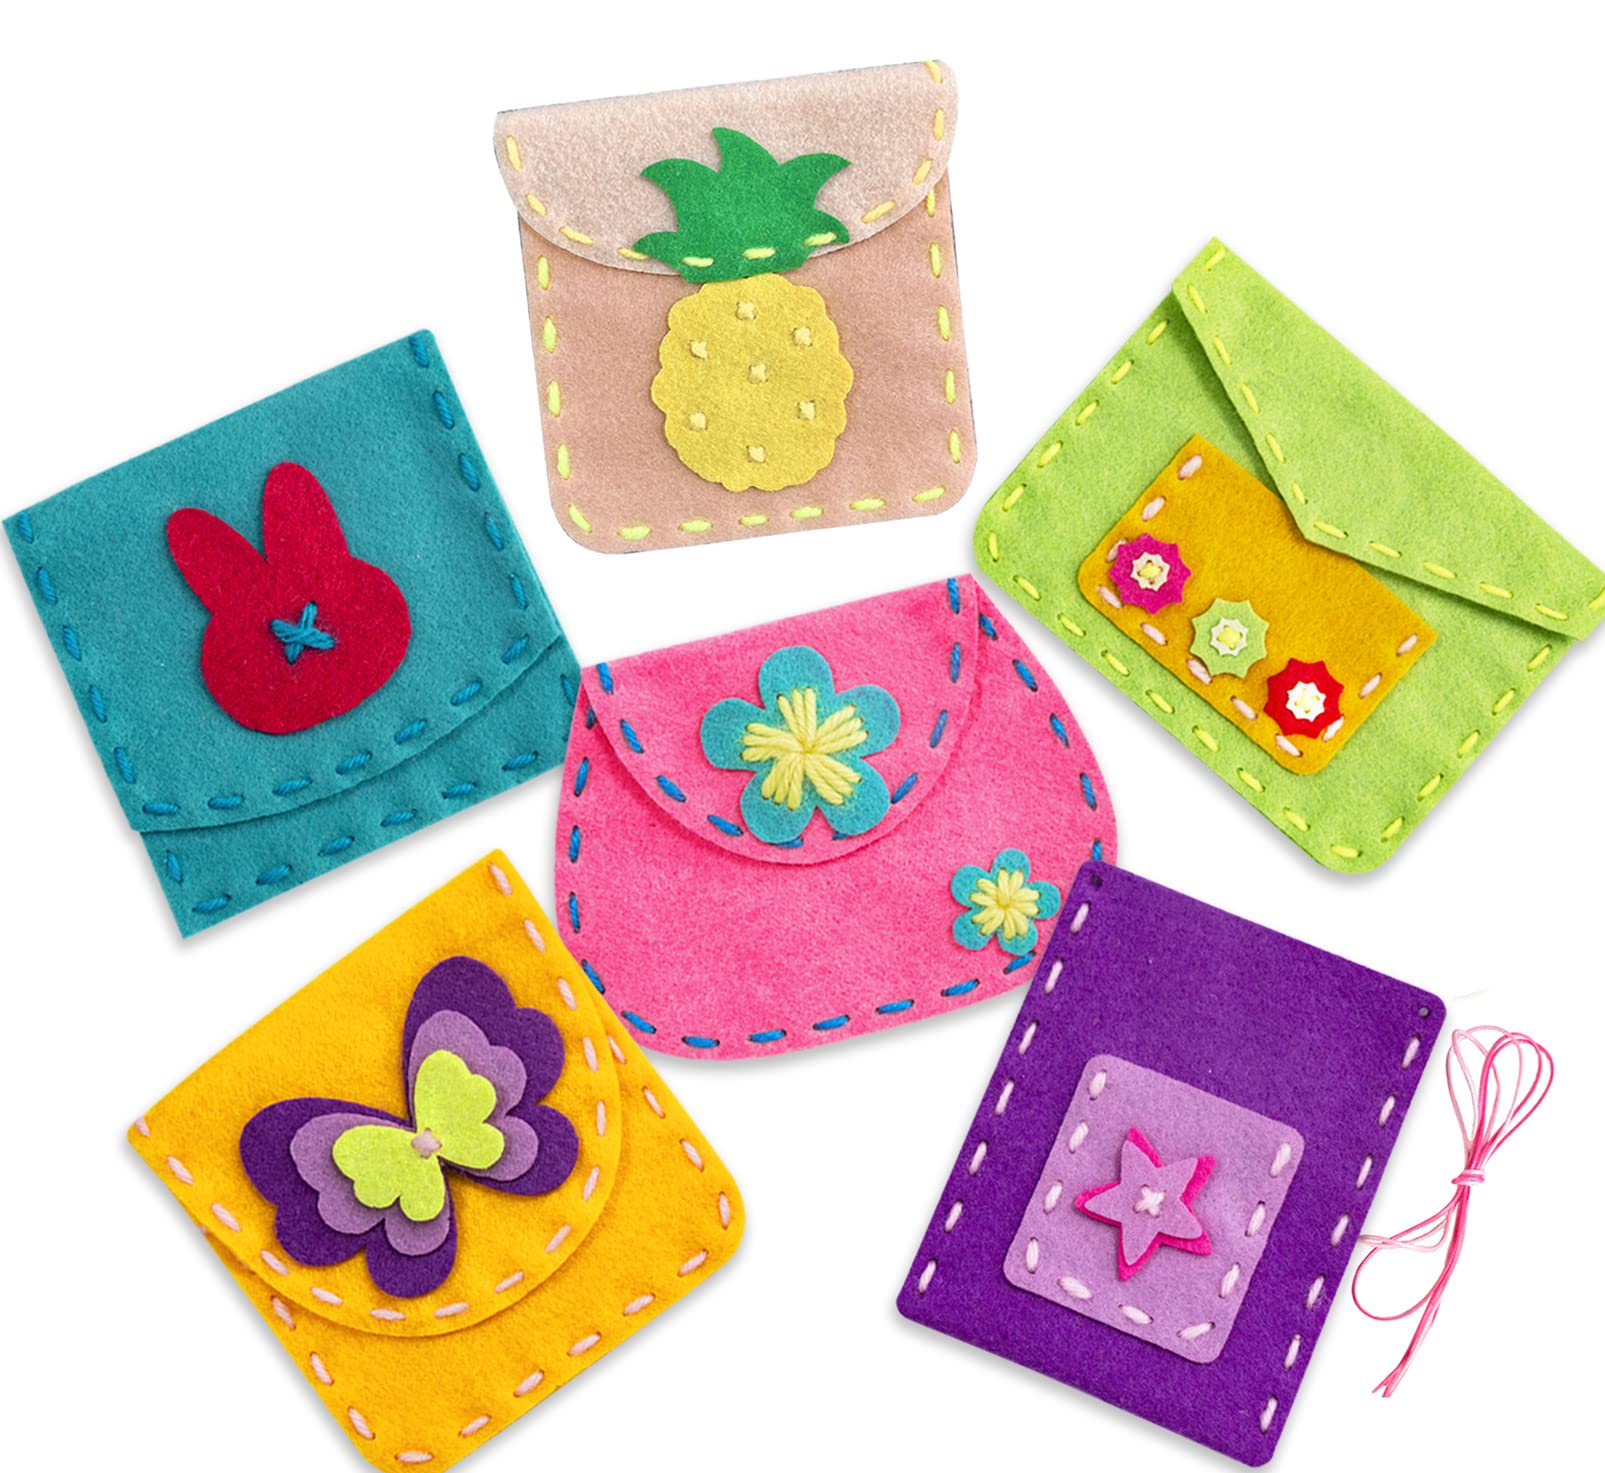 Flying Childhood Felt Crafts for Girls Sewing Own Bags and Purses